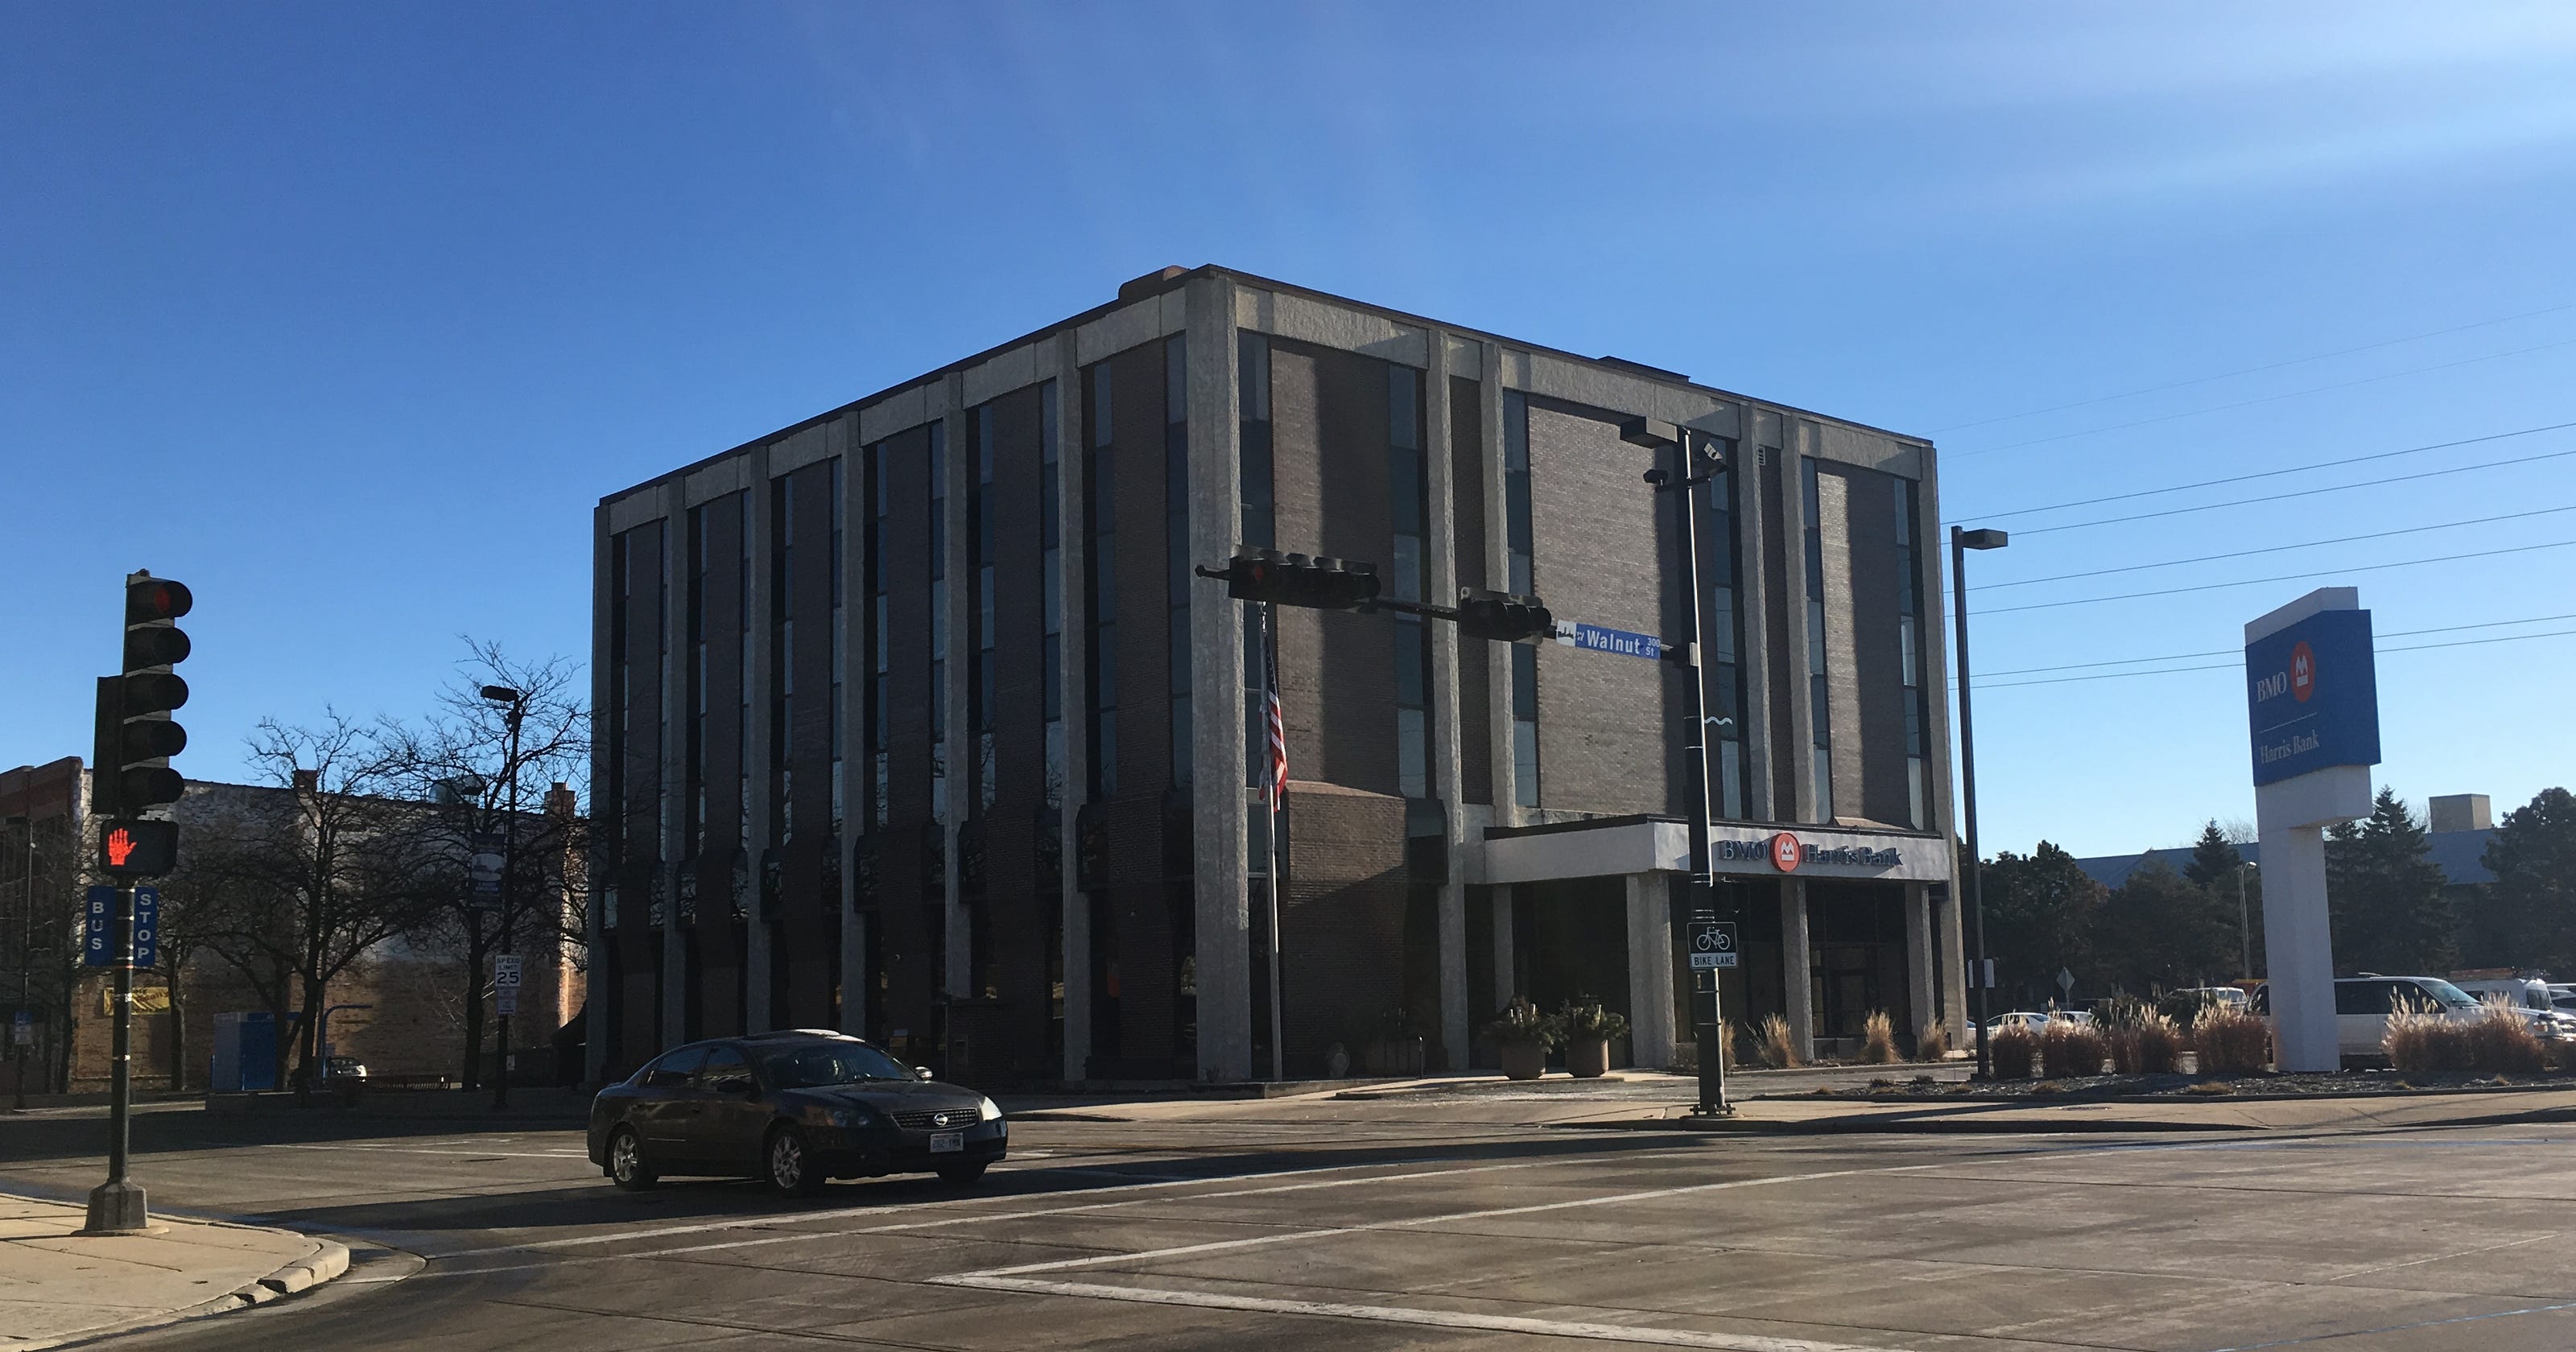 Downtown Green Bay Pete S Garage Owners Buys Bmo Harris Bank Building